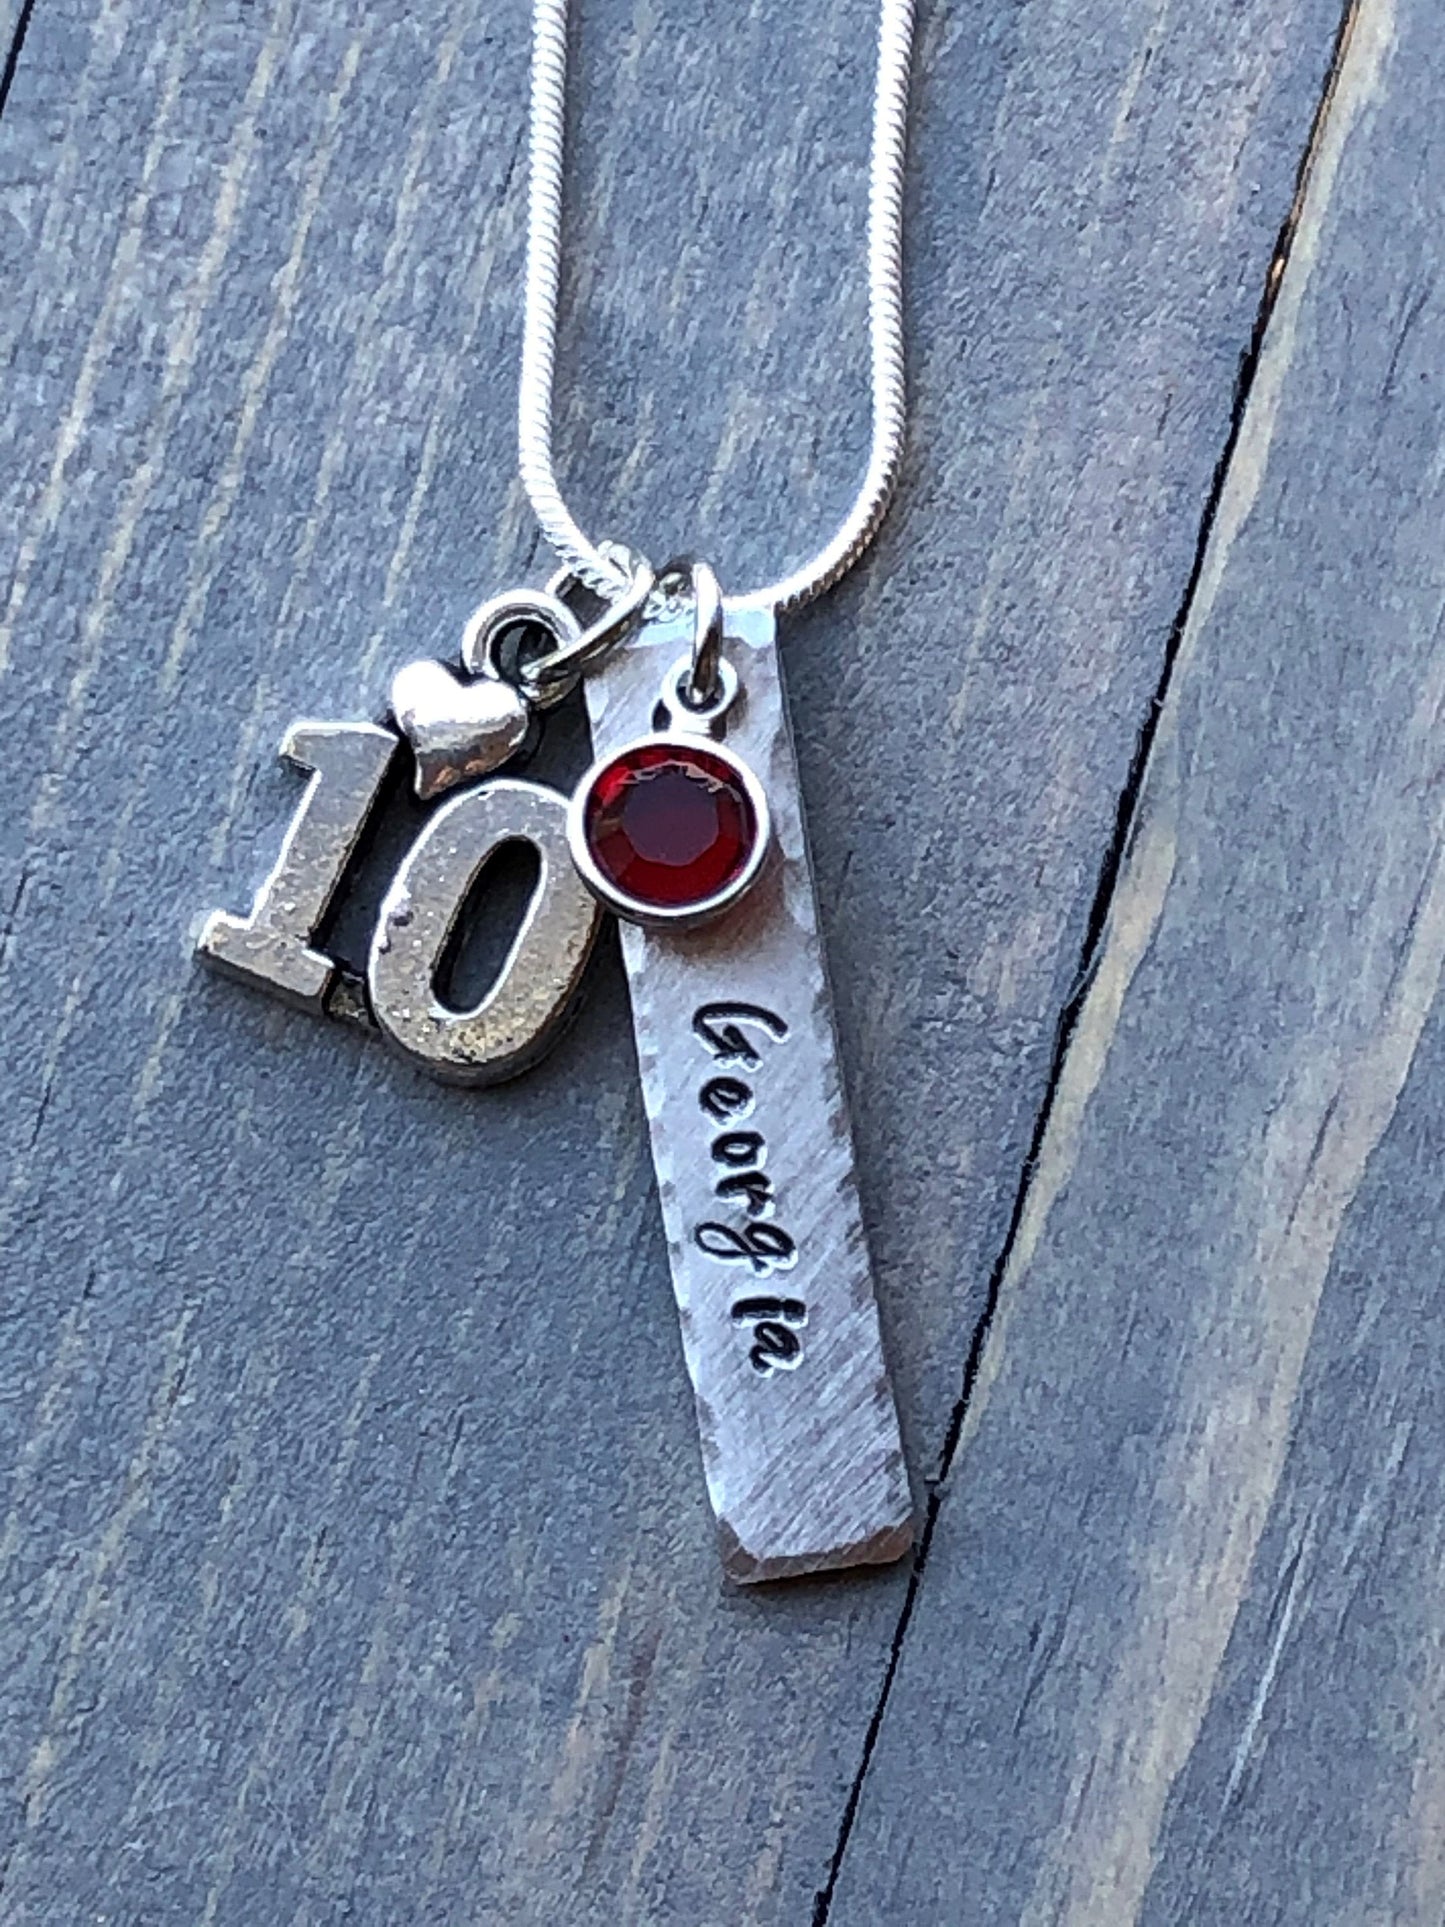 12th Birthday Necklace, Gift for Girl, Personalized Necklace, Birthstone Necklace, Gift for Girl&#39;s 12th birday, Turning 12, Add a Charm